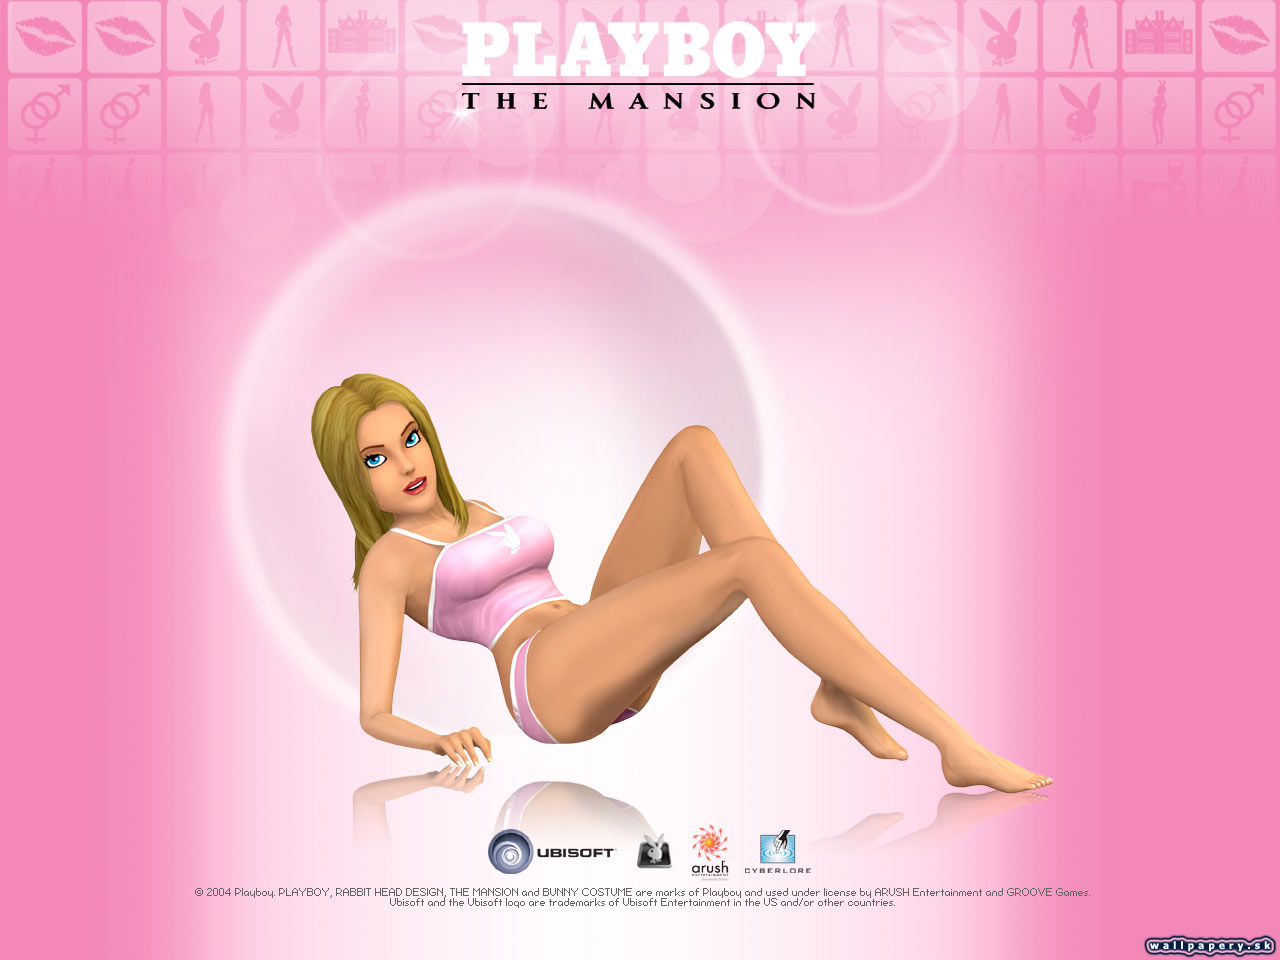 Playboy: The Mansion - wallpaper 1